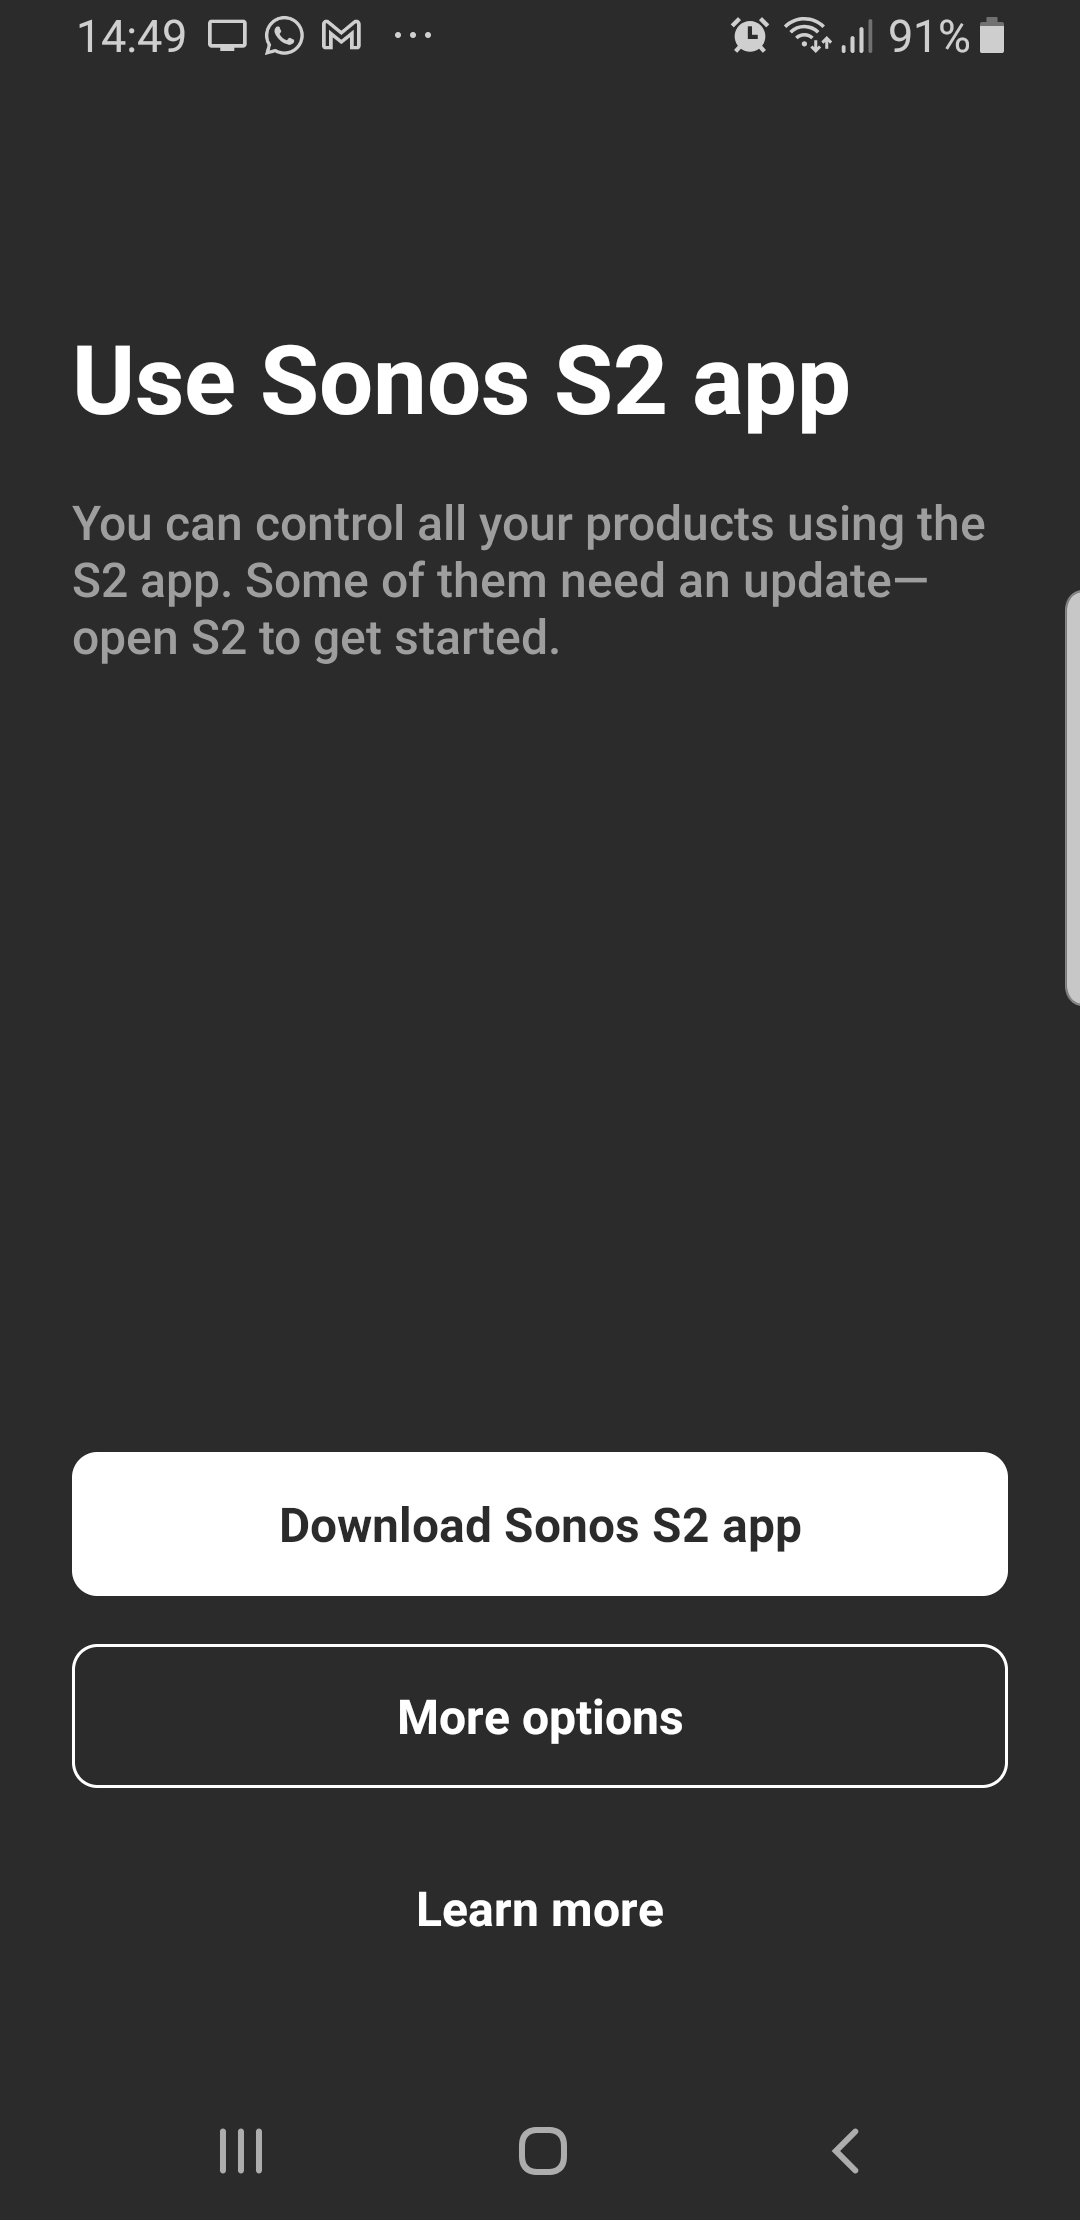 overskydende køleskab Glow Sonos S1 controller app only offering an s2 upgrade; can't play devices |  Sonos Community